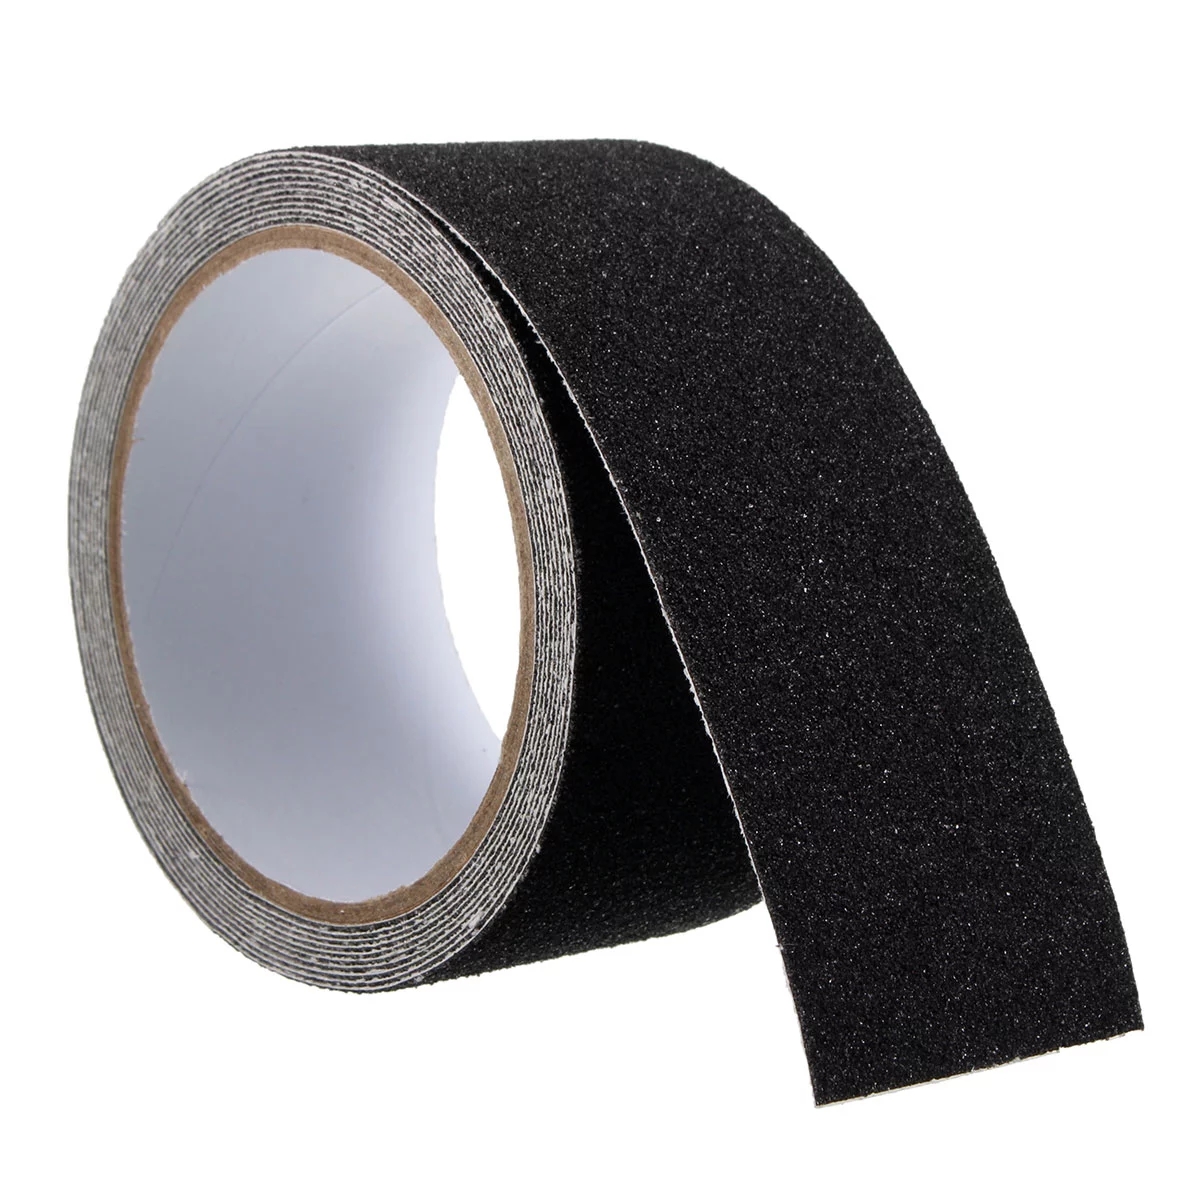 Non-Slip-Safety-Grip-Tape-Anti-Slip-Indoor-Outdoor-Stickers-Strong-Adhesive-Safety-Traction-Tape-Sta-1751585-4